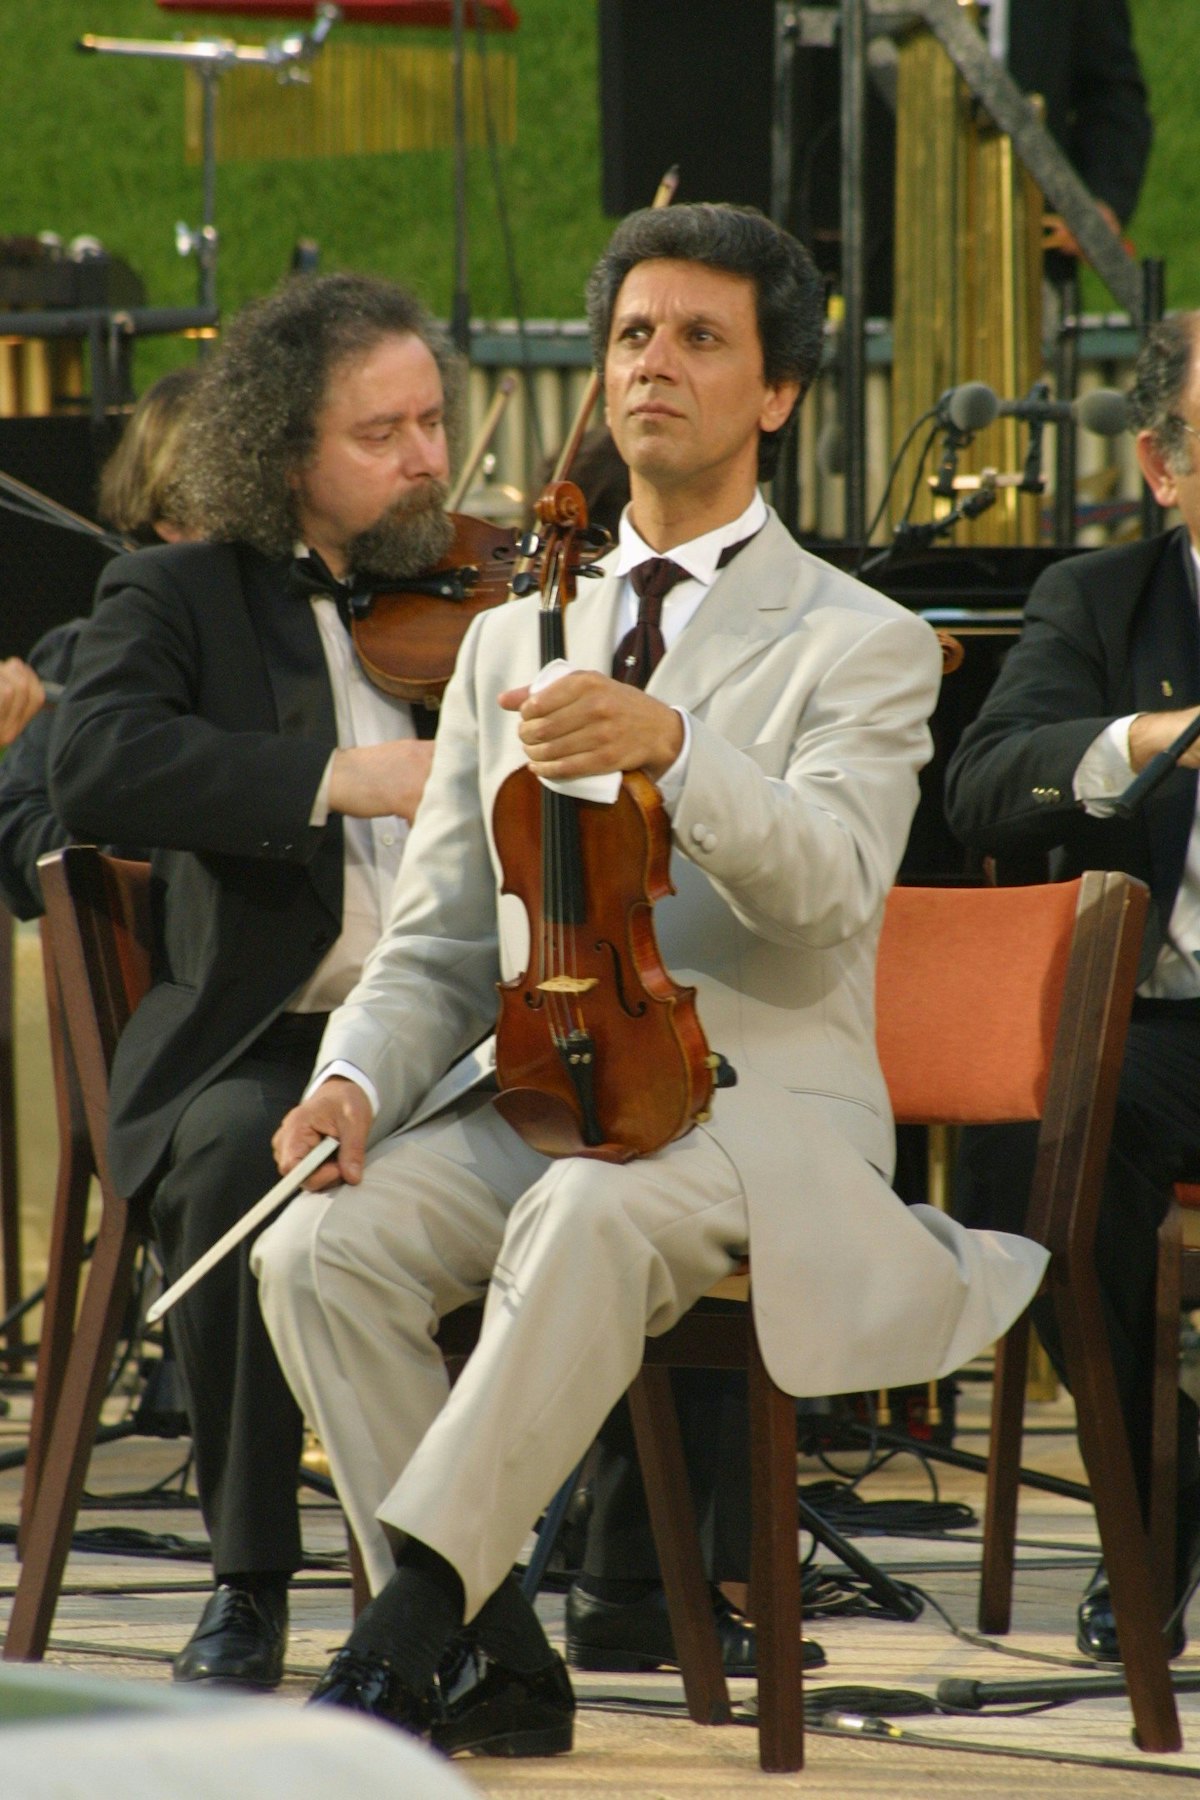 Bijan Khadem-Missagh (pictured) and his two daughters, Dorothy and Shirin, will perform at the festival. Mr. Khadem-Missagh and his family played at the opening of the Mount Carmel terraces in 2001.